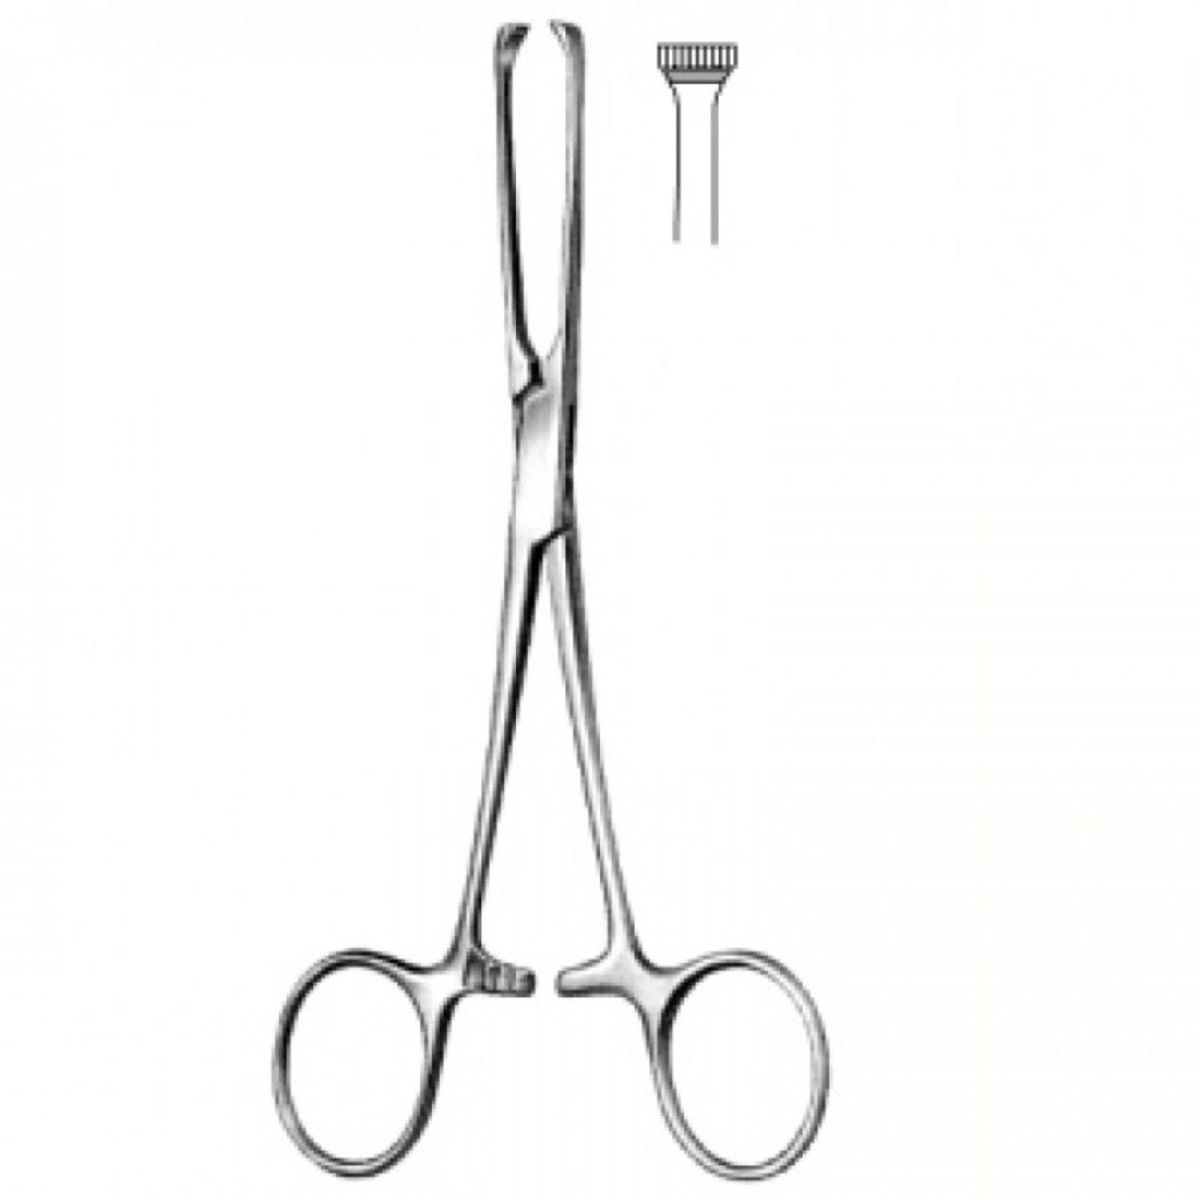 Basic Needed Surgical Instruments